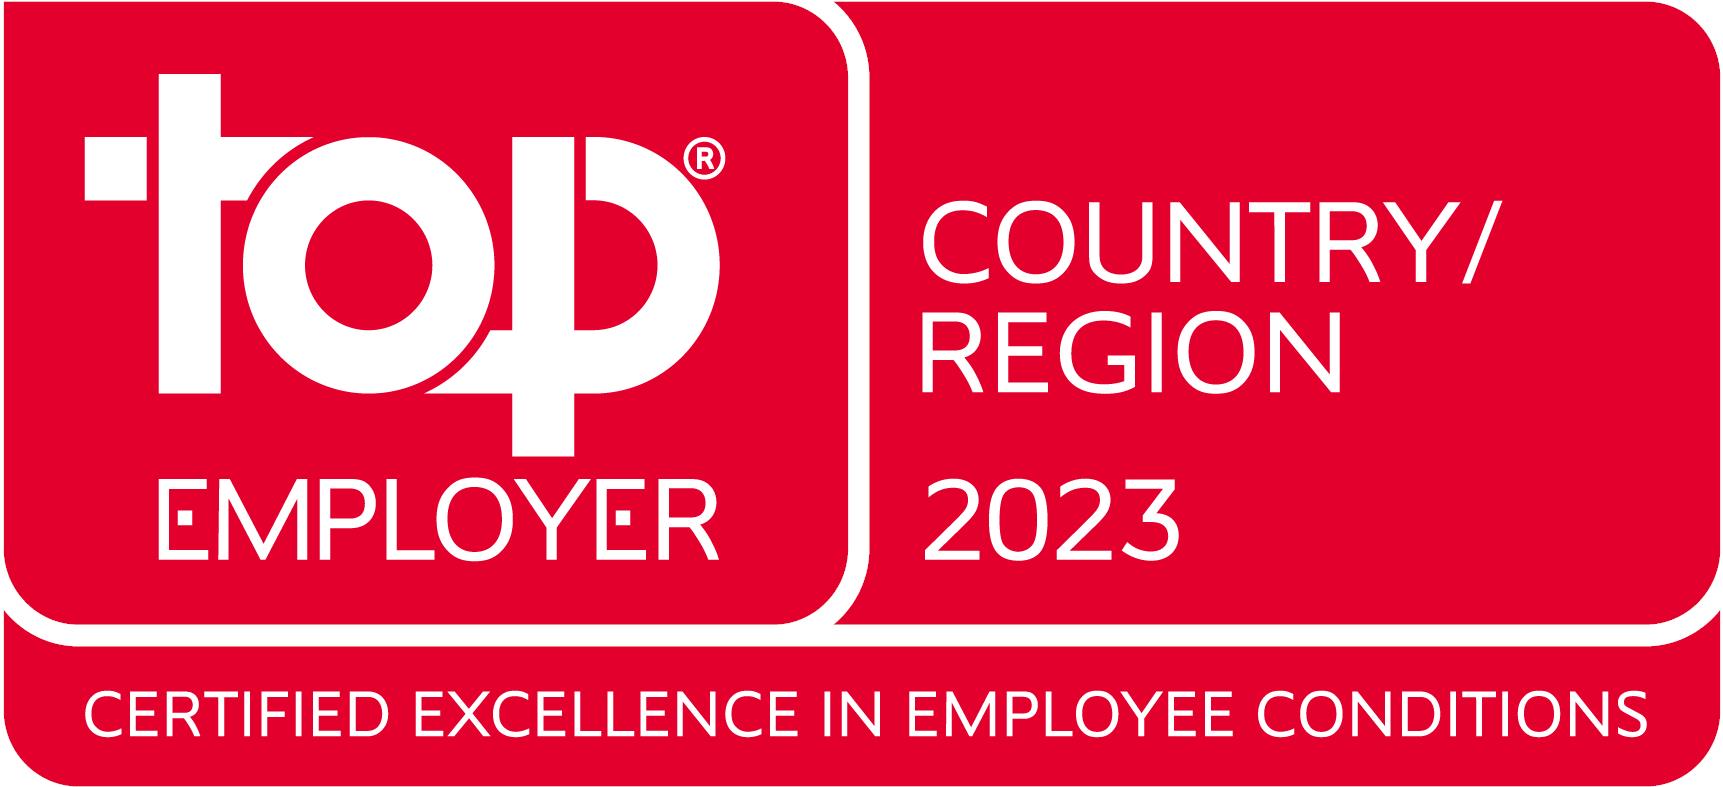 Top_Employer_Country_2022.png